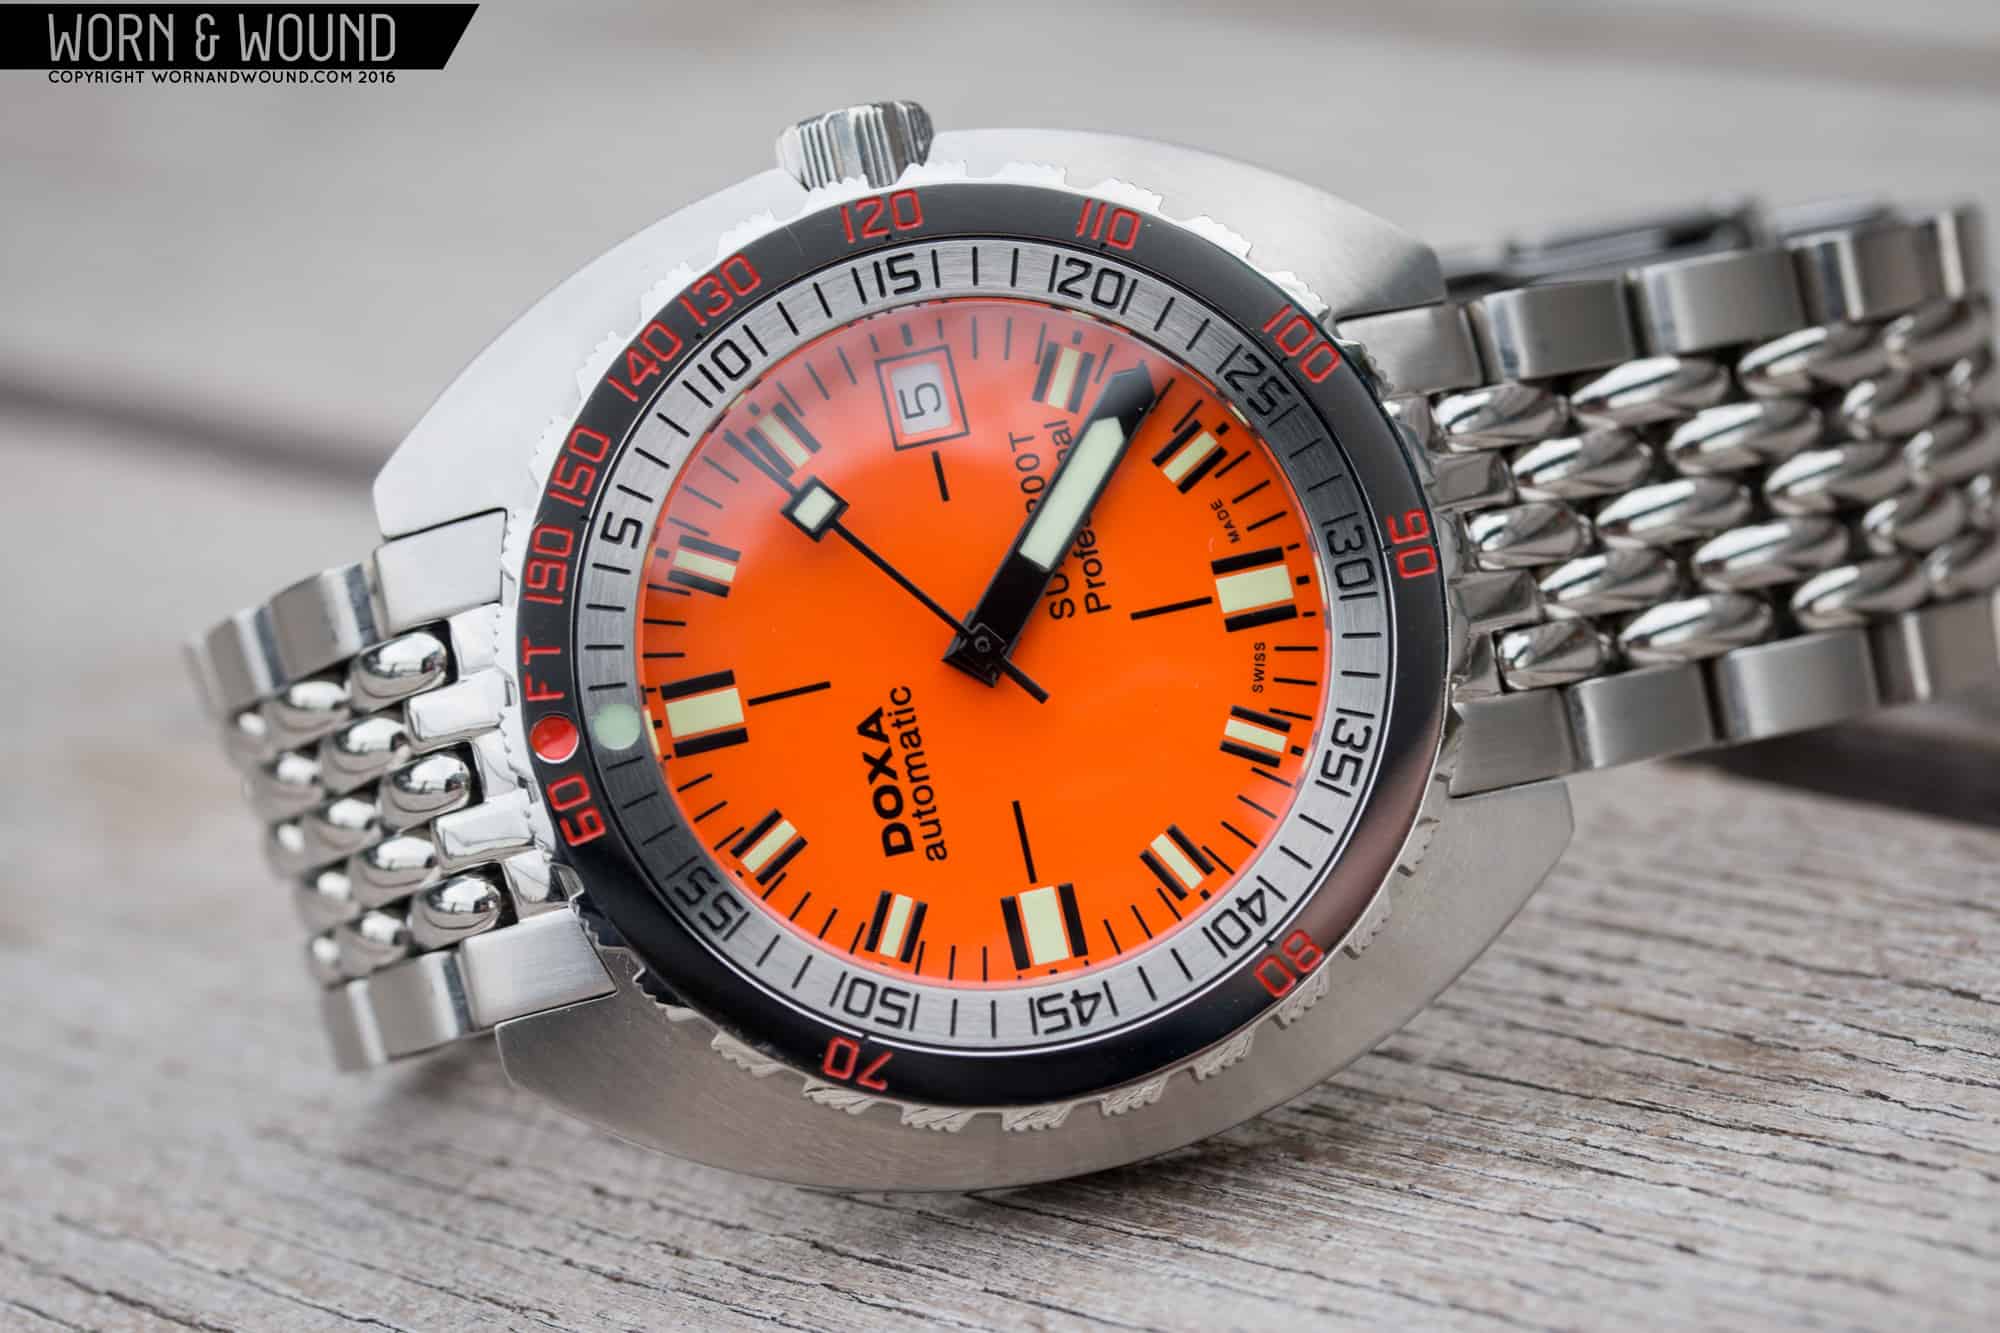 DOXA SUB 1200T Professional Review - Worn & Wound